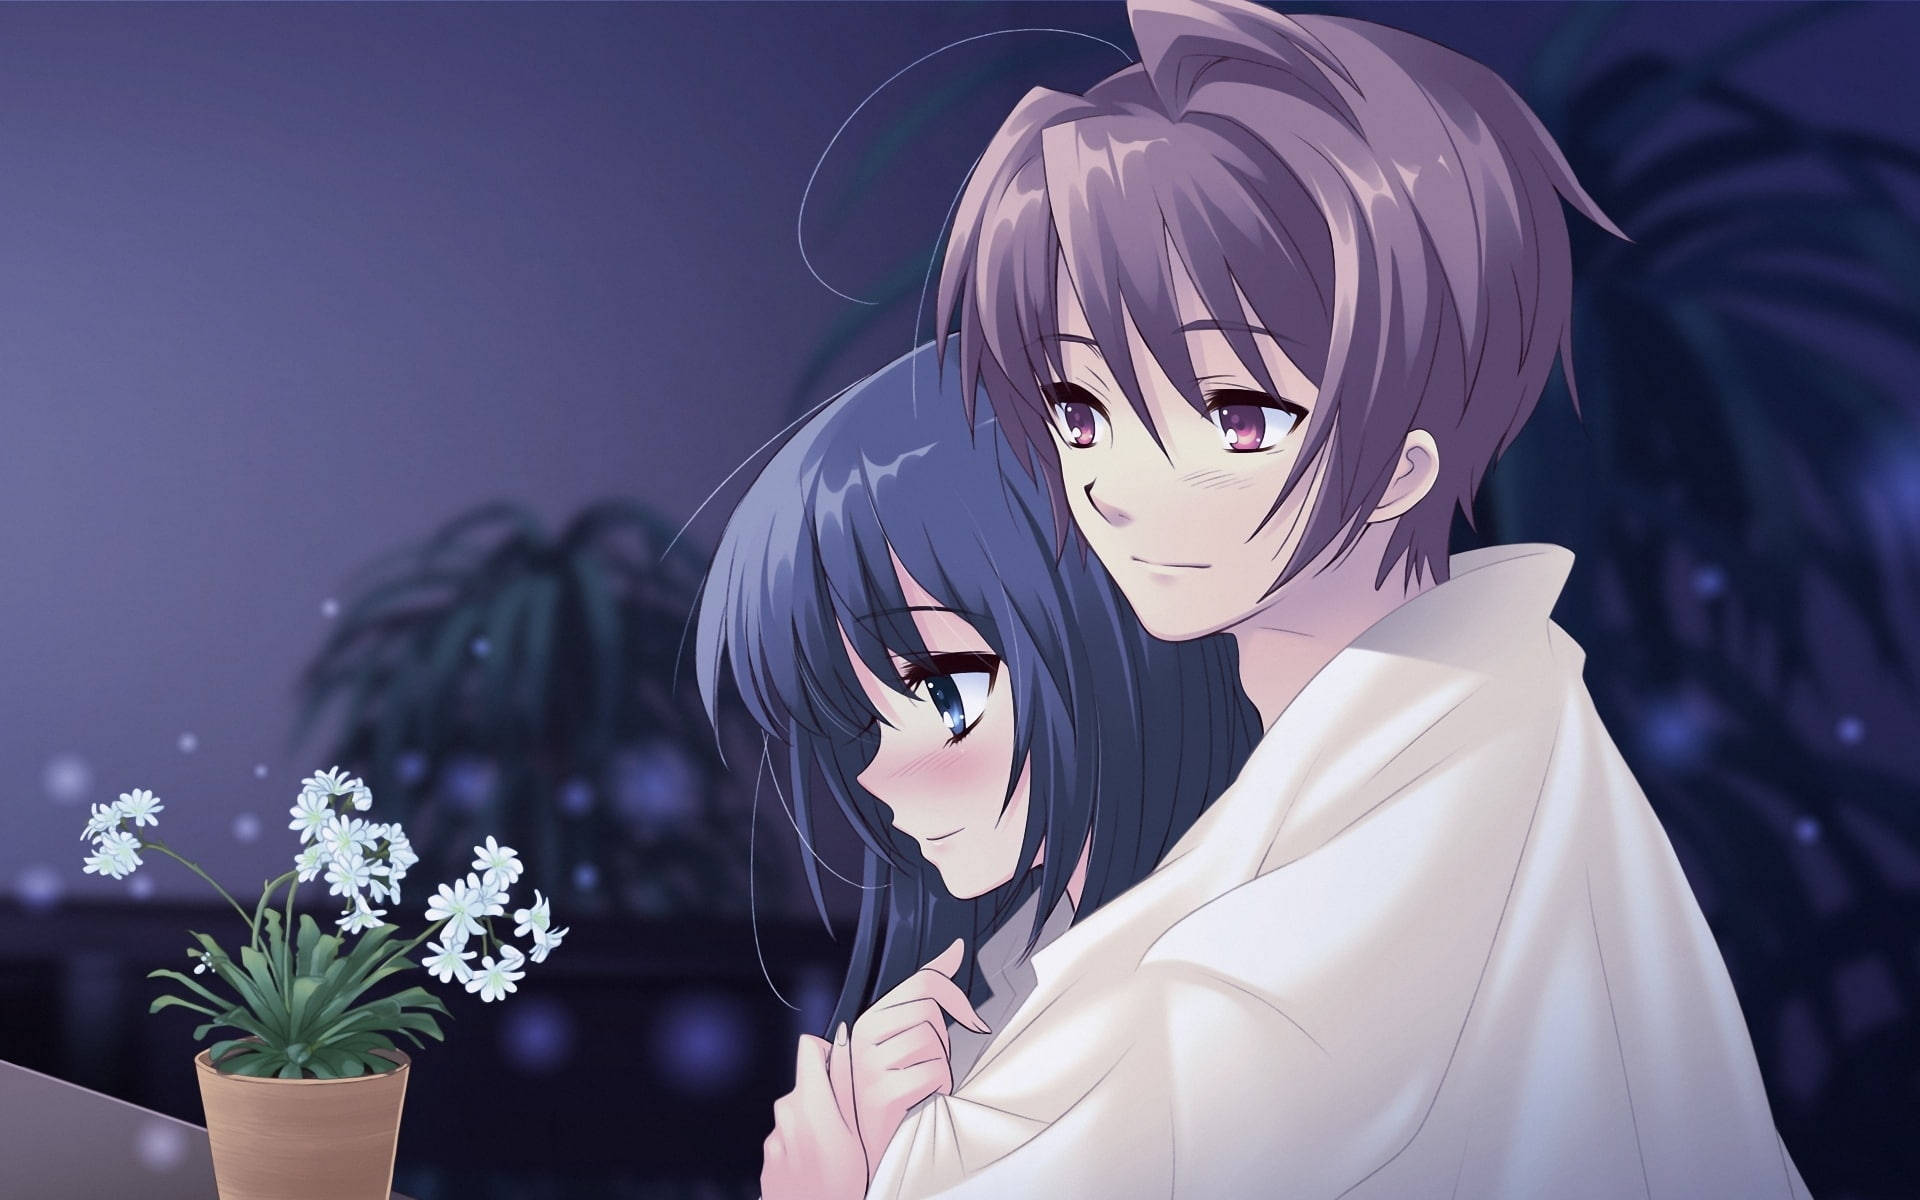 Cute Anime Couple And Potted Flowers